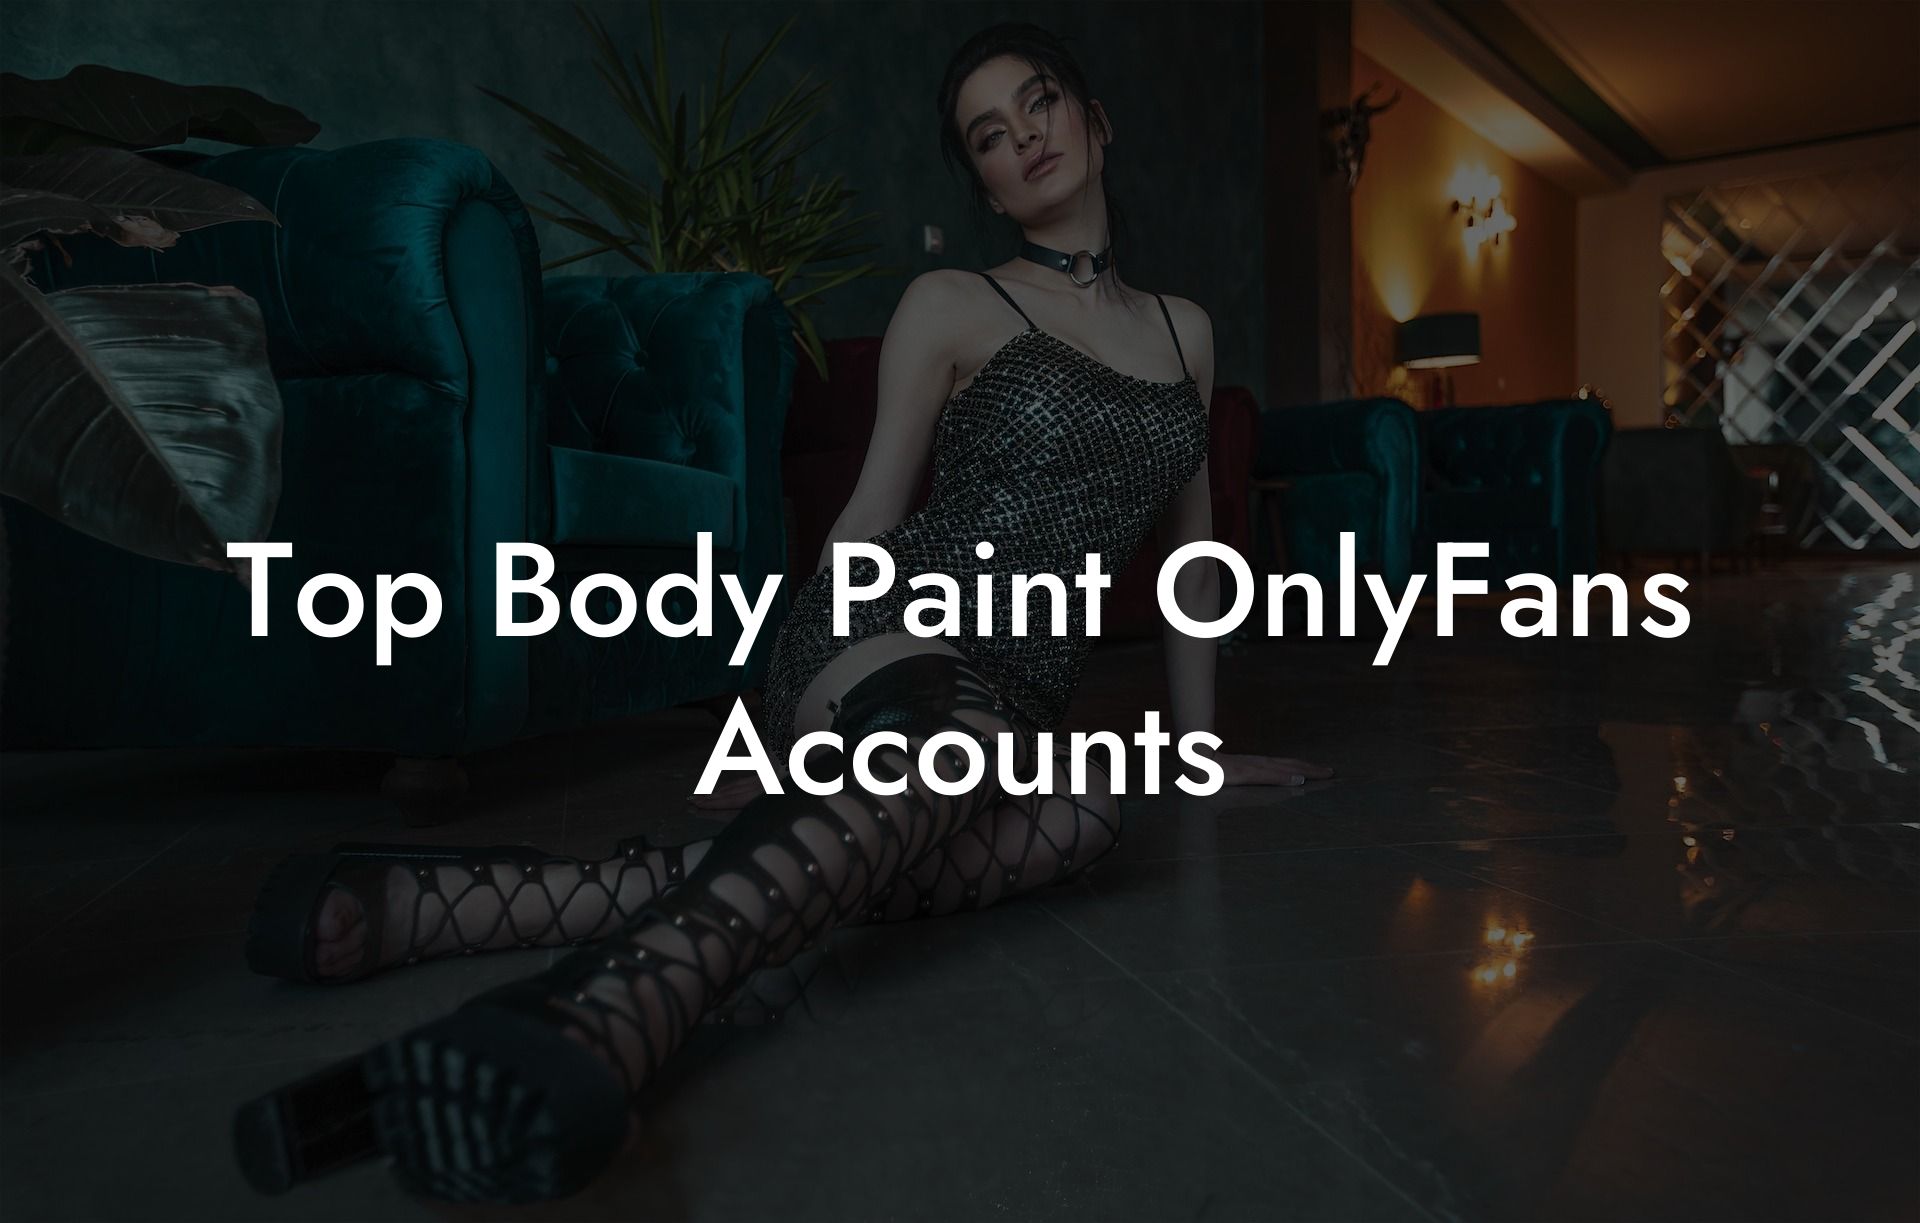 Top Body Paint OnlyFans Accounts